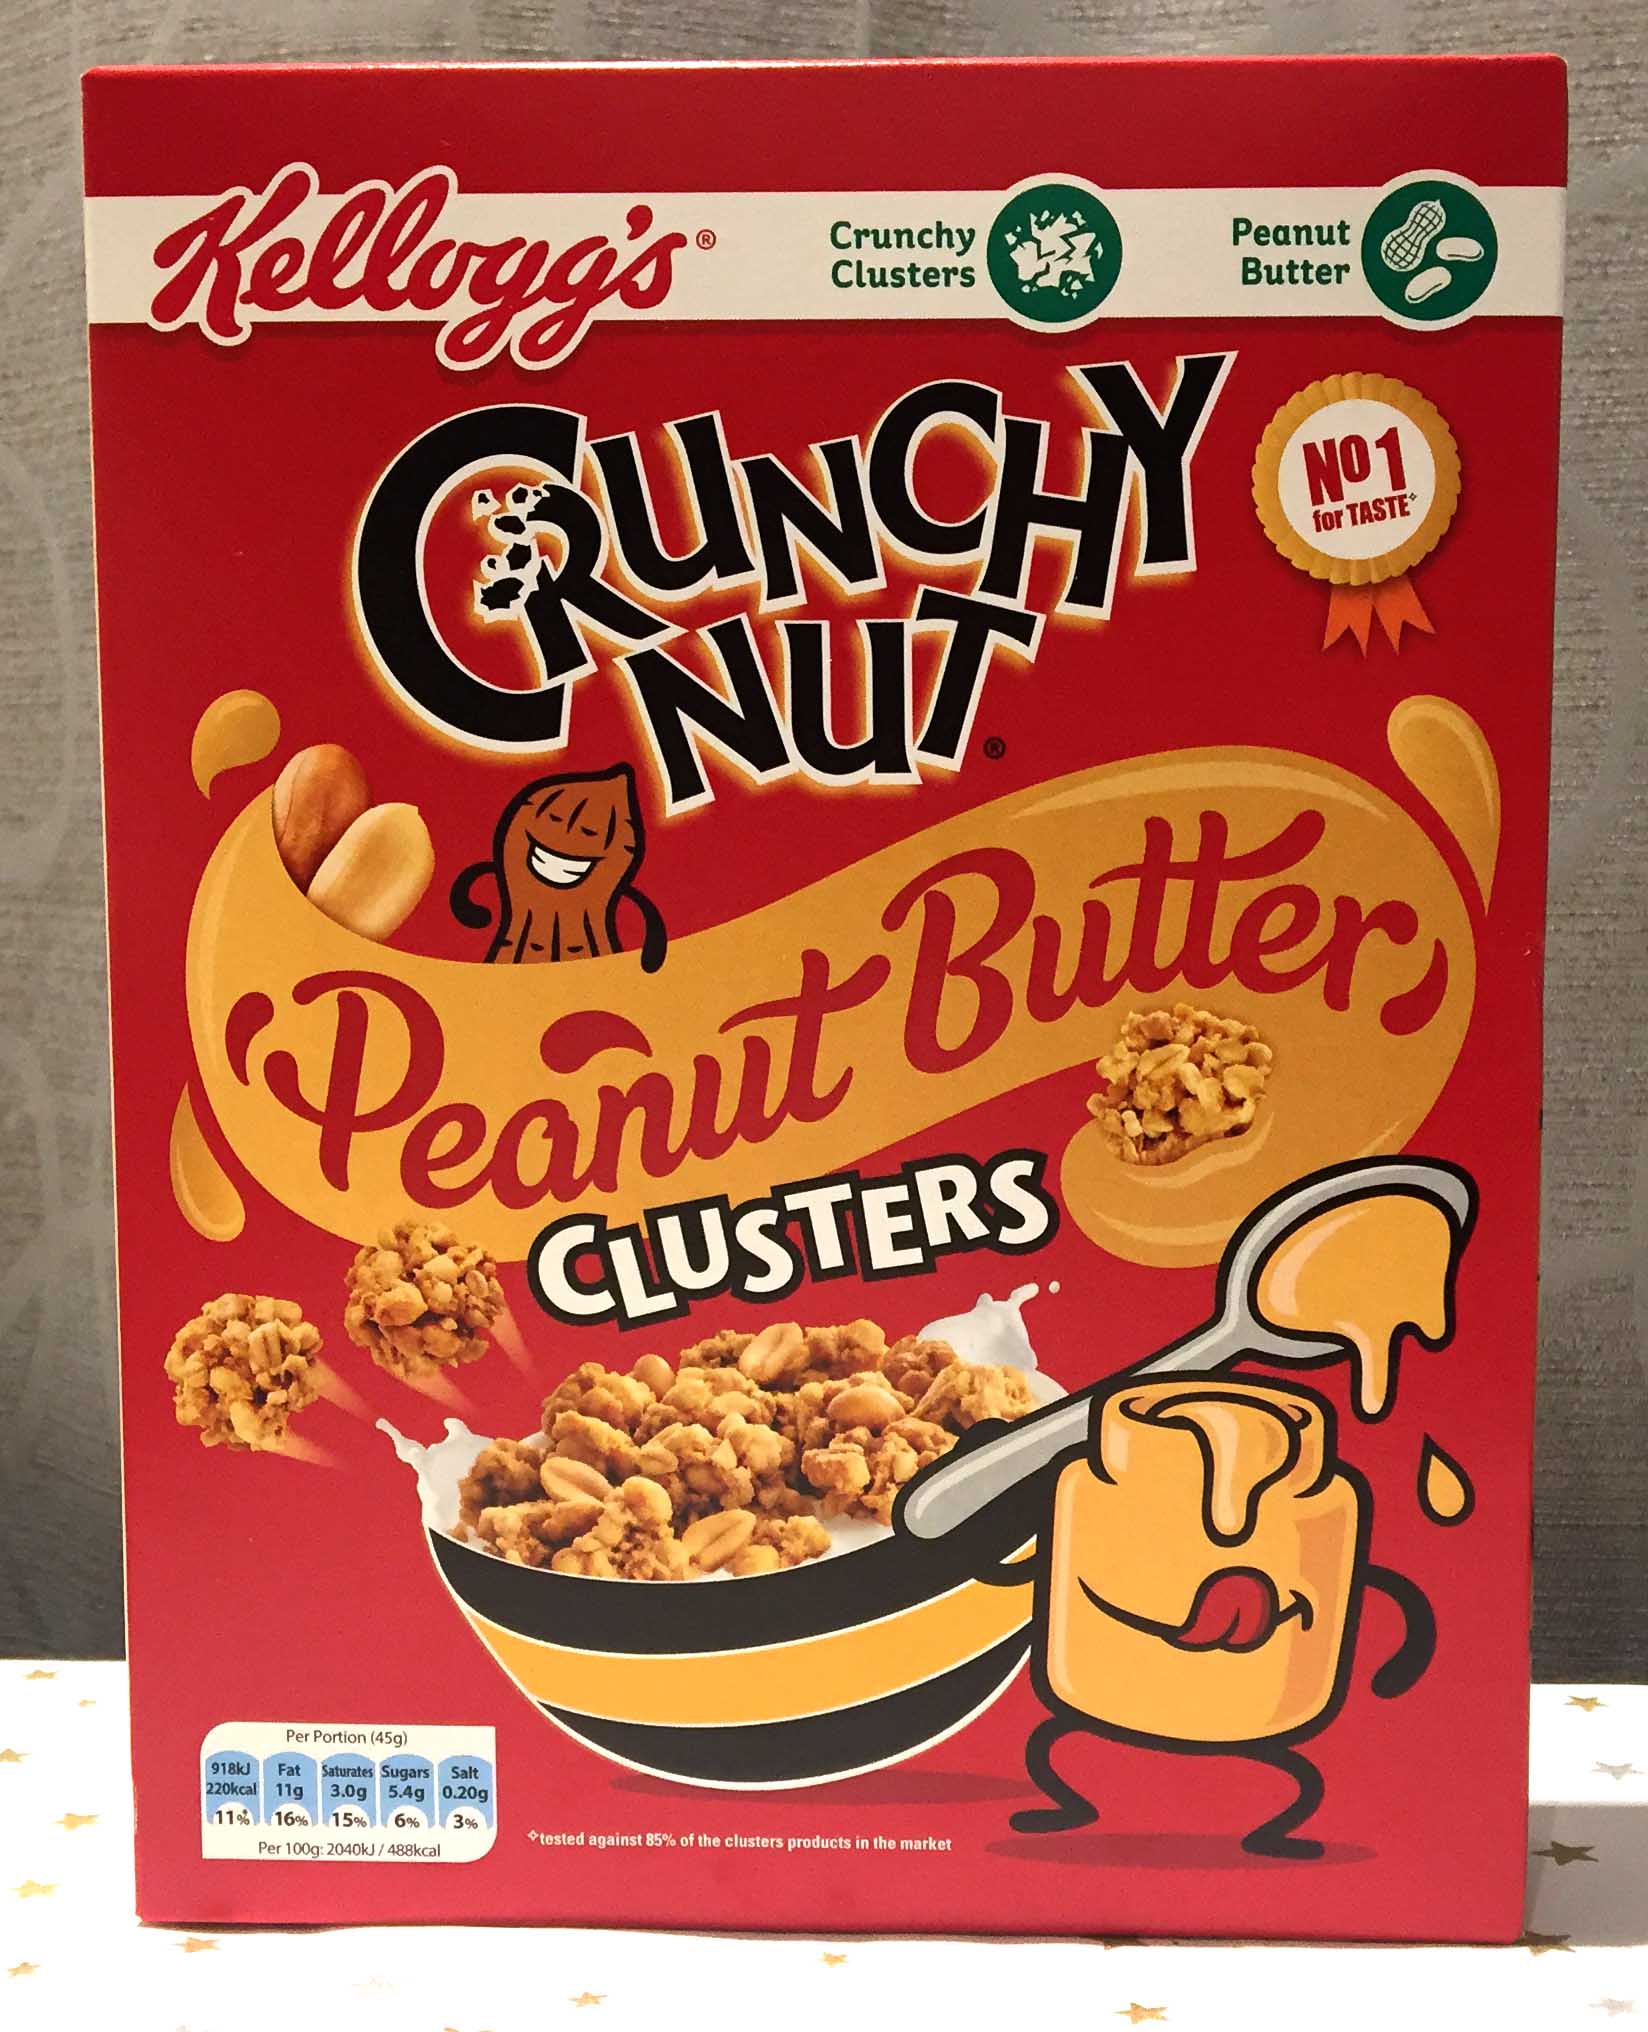 https://www.cerealously.net/wp-content/uploads/2017/01/kelloggs-crunchy-nut-clusters-peanut-butter-cereal-box.jpg